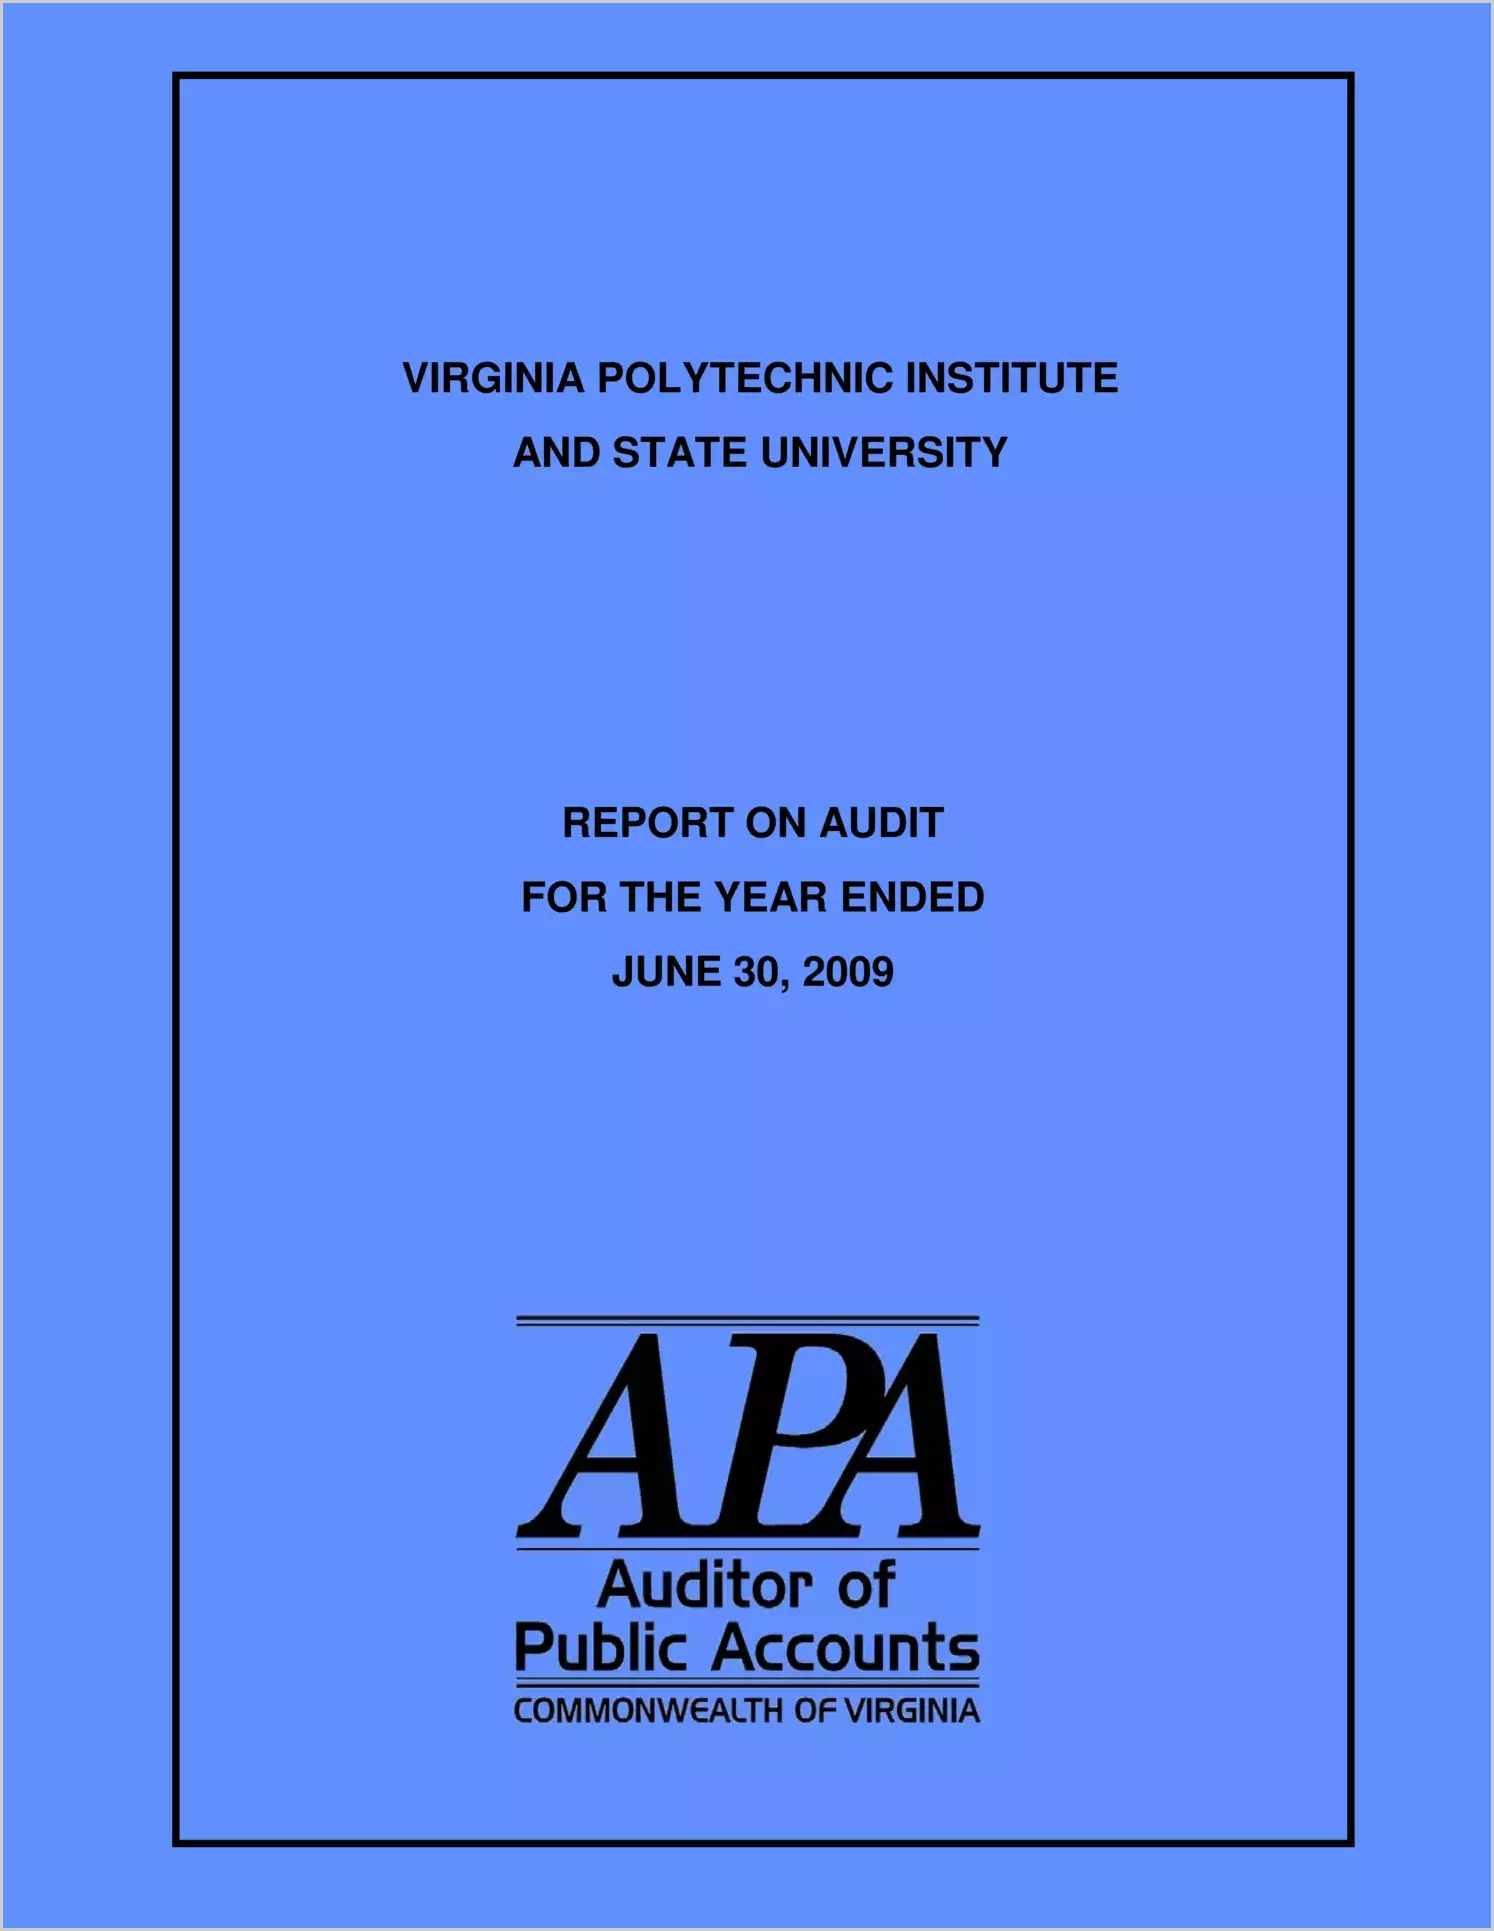 Virginia Polytechnic Institute and State University for the year ended June 30, 2009